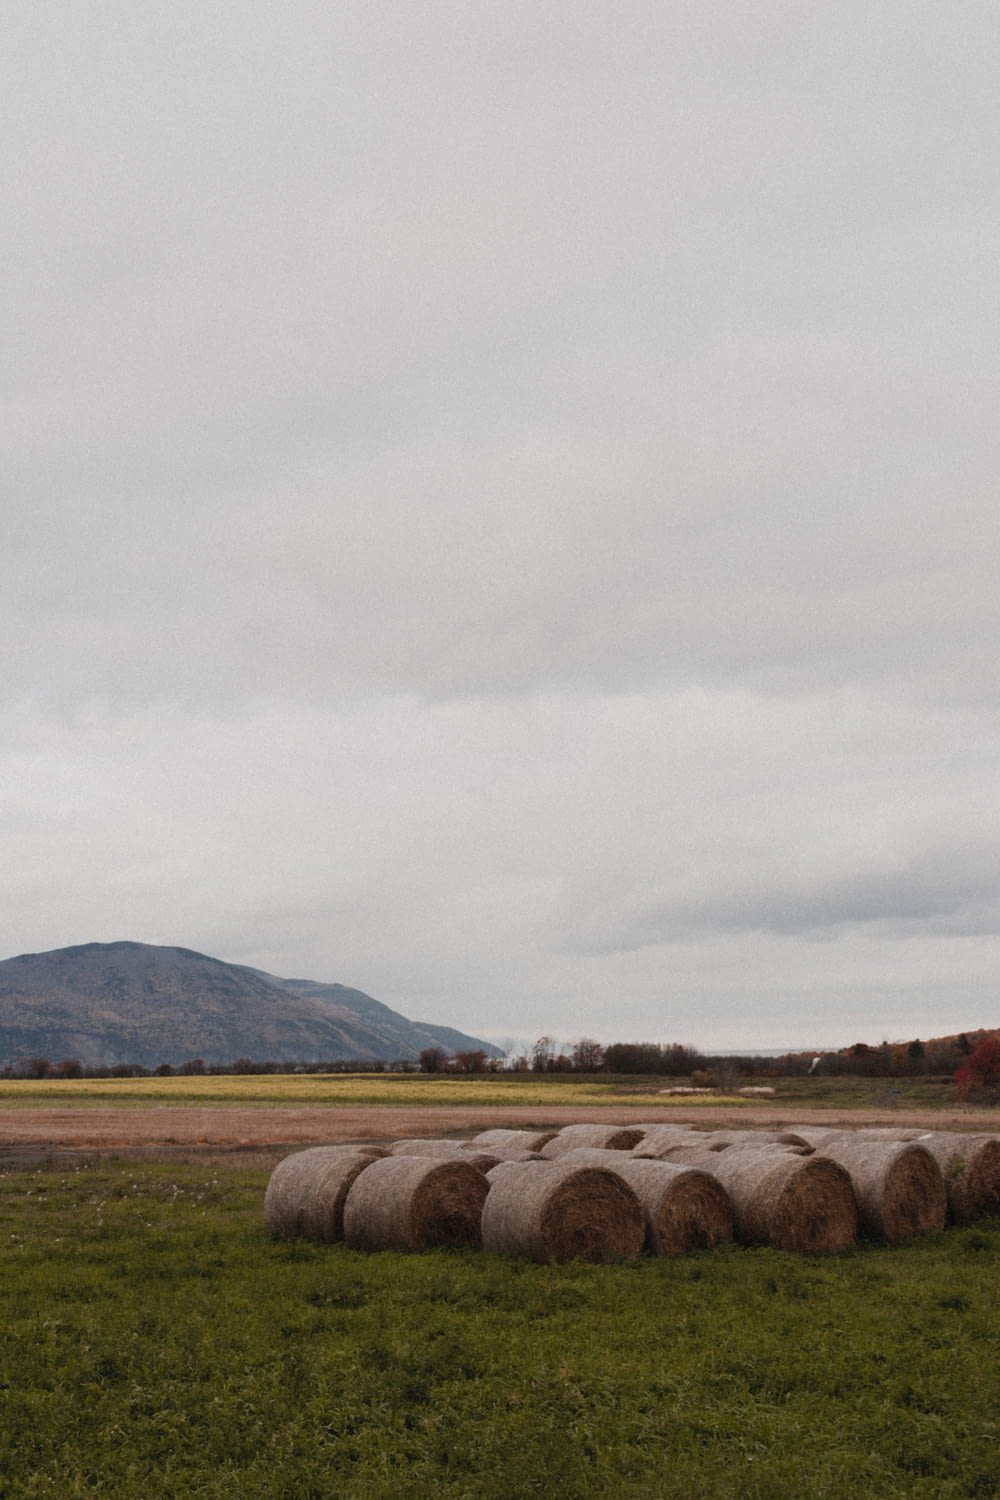 hay bales in a field with a mountain in the background